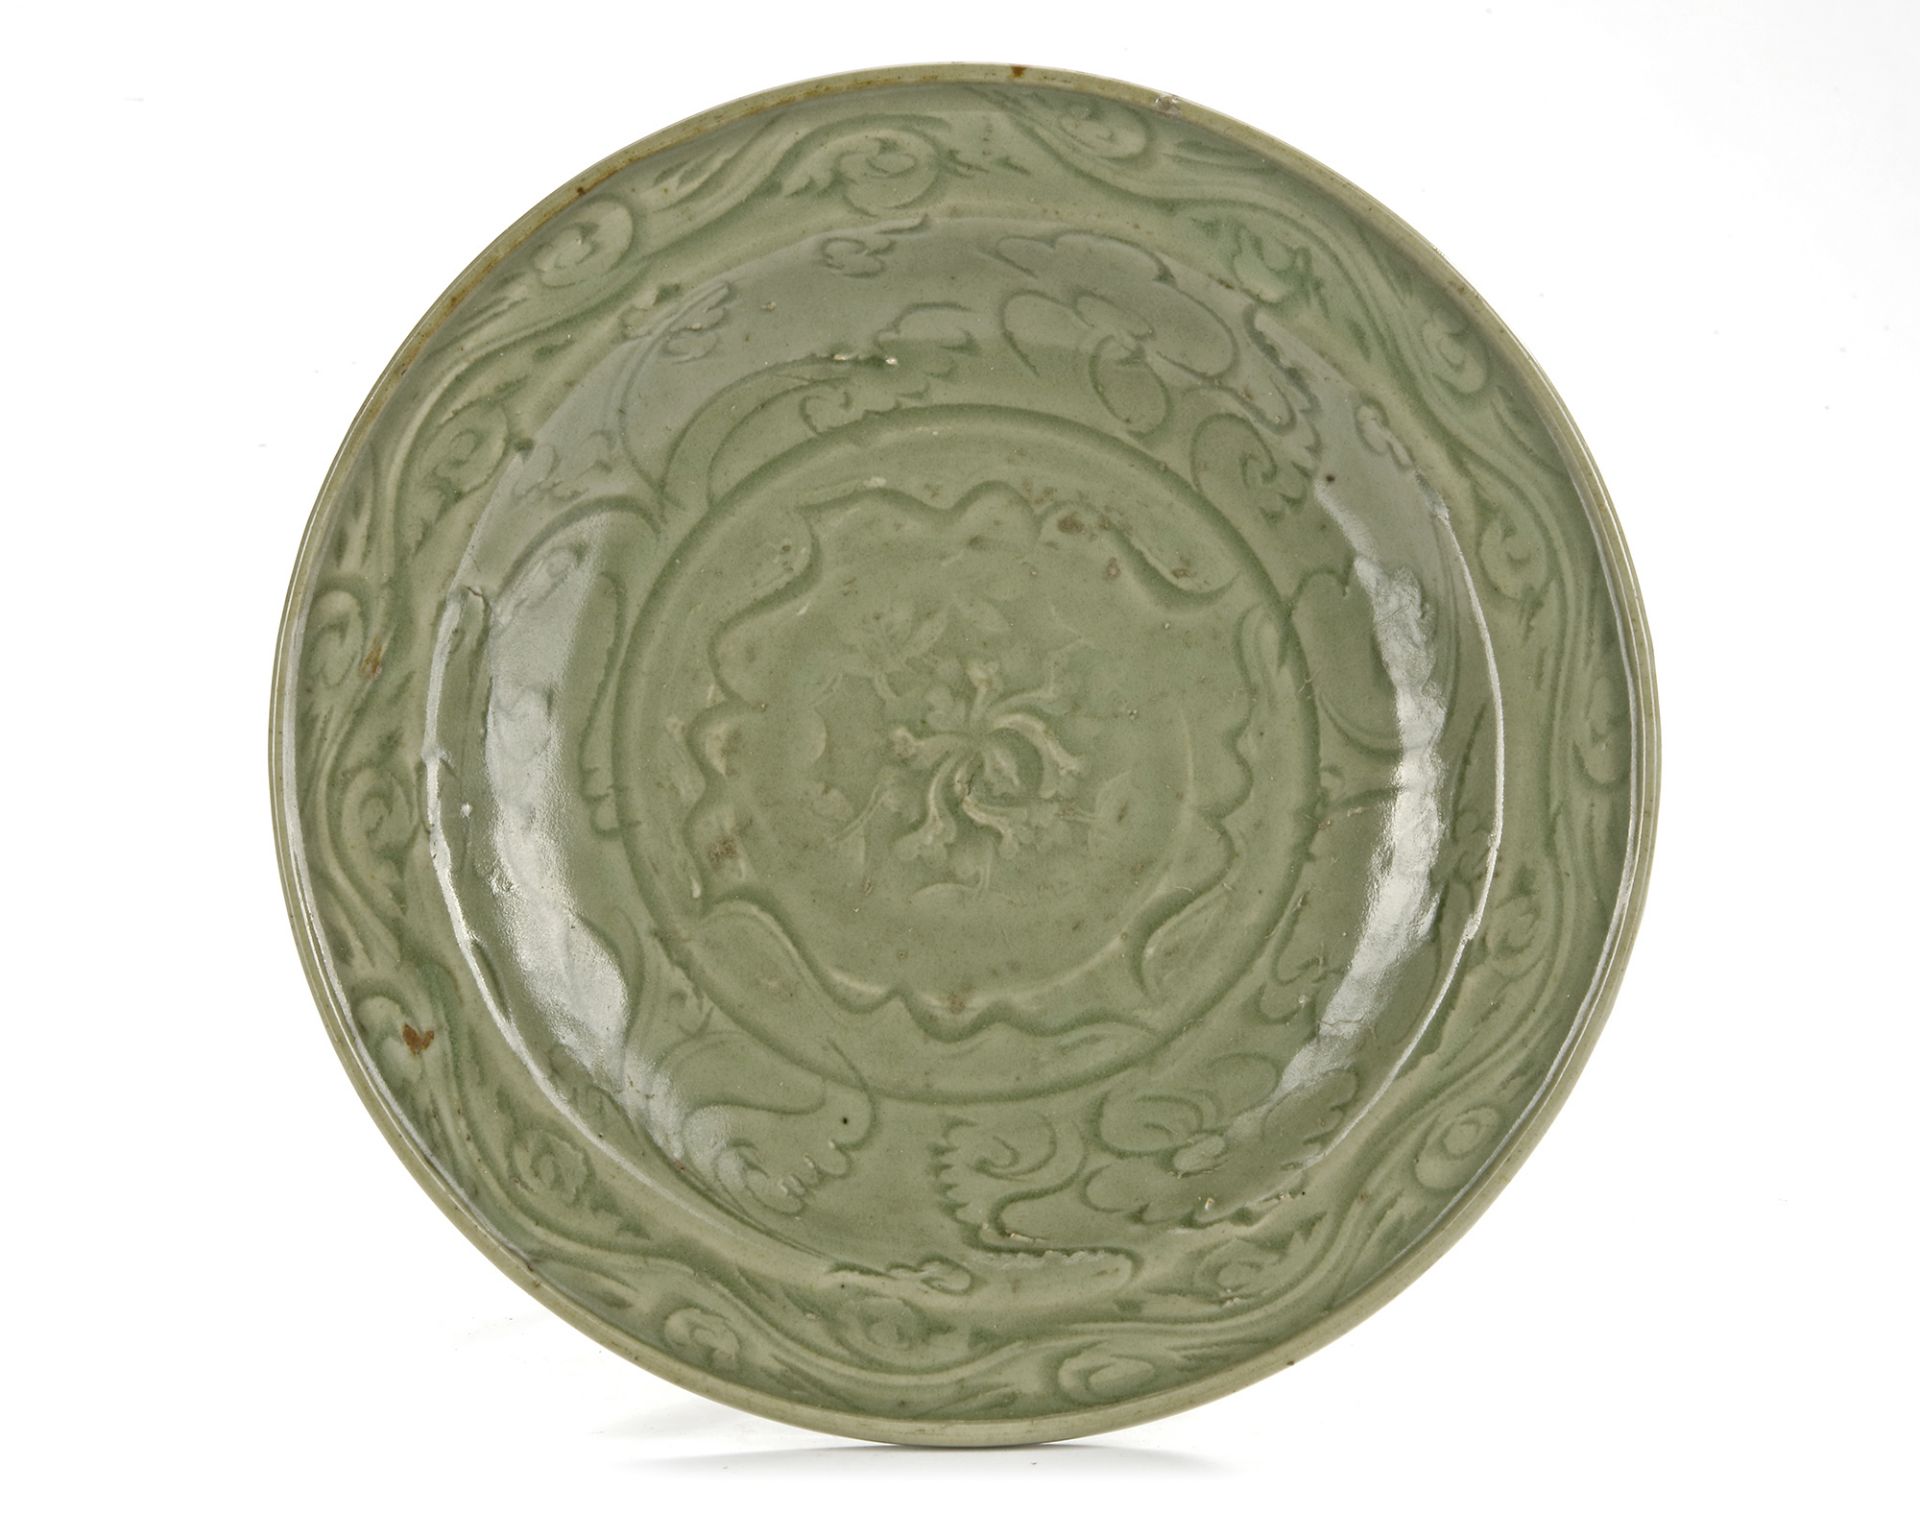 A CHINESE LONGQUAN DISH, MING DYNASTY (1368-1644)